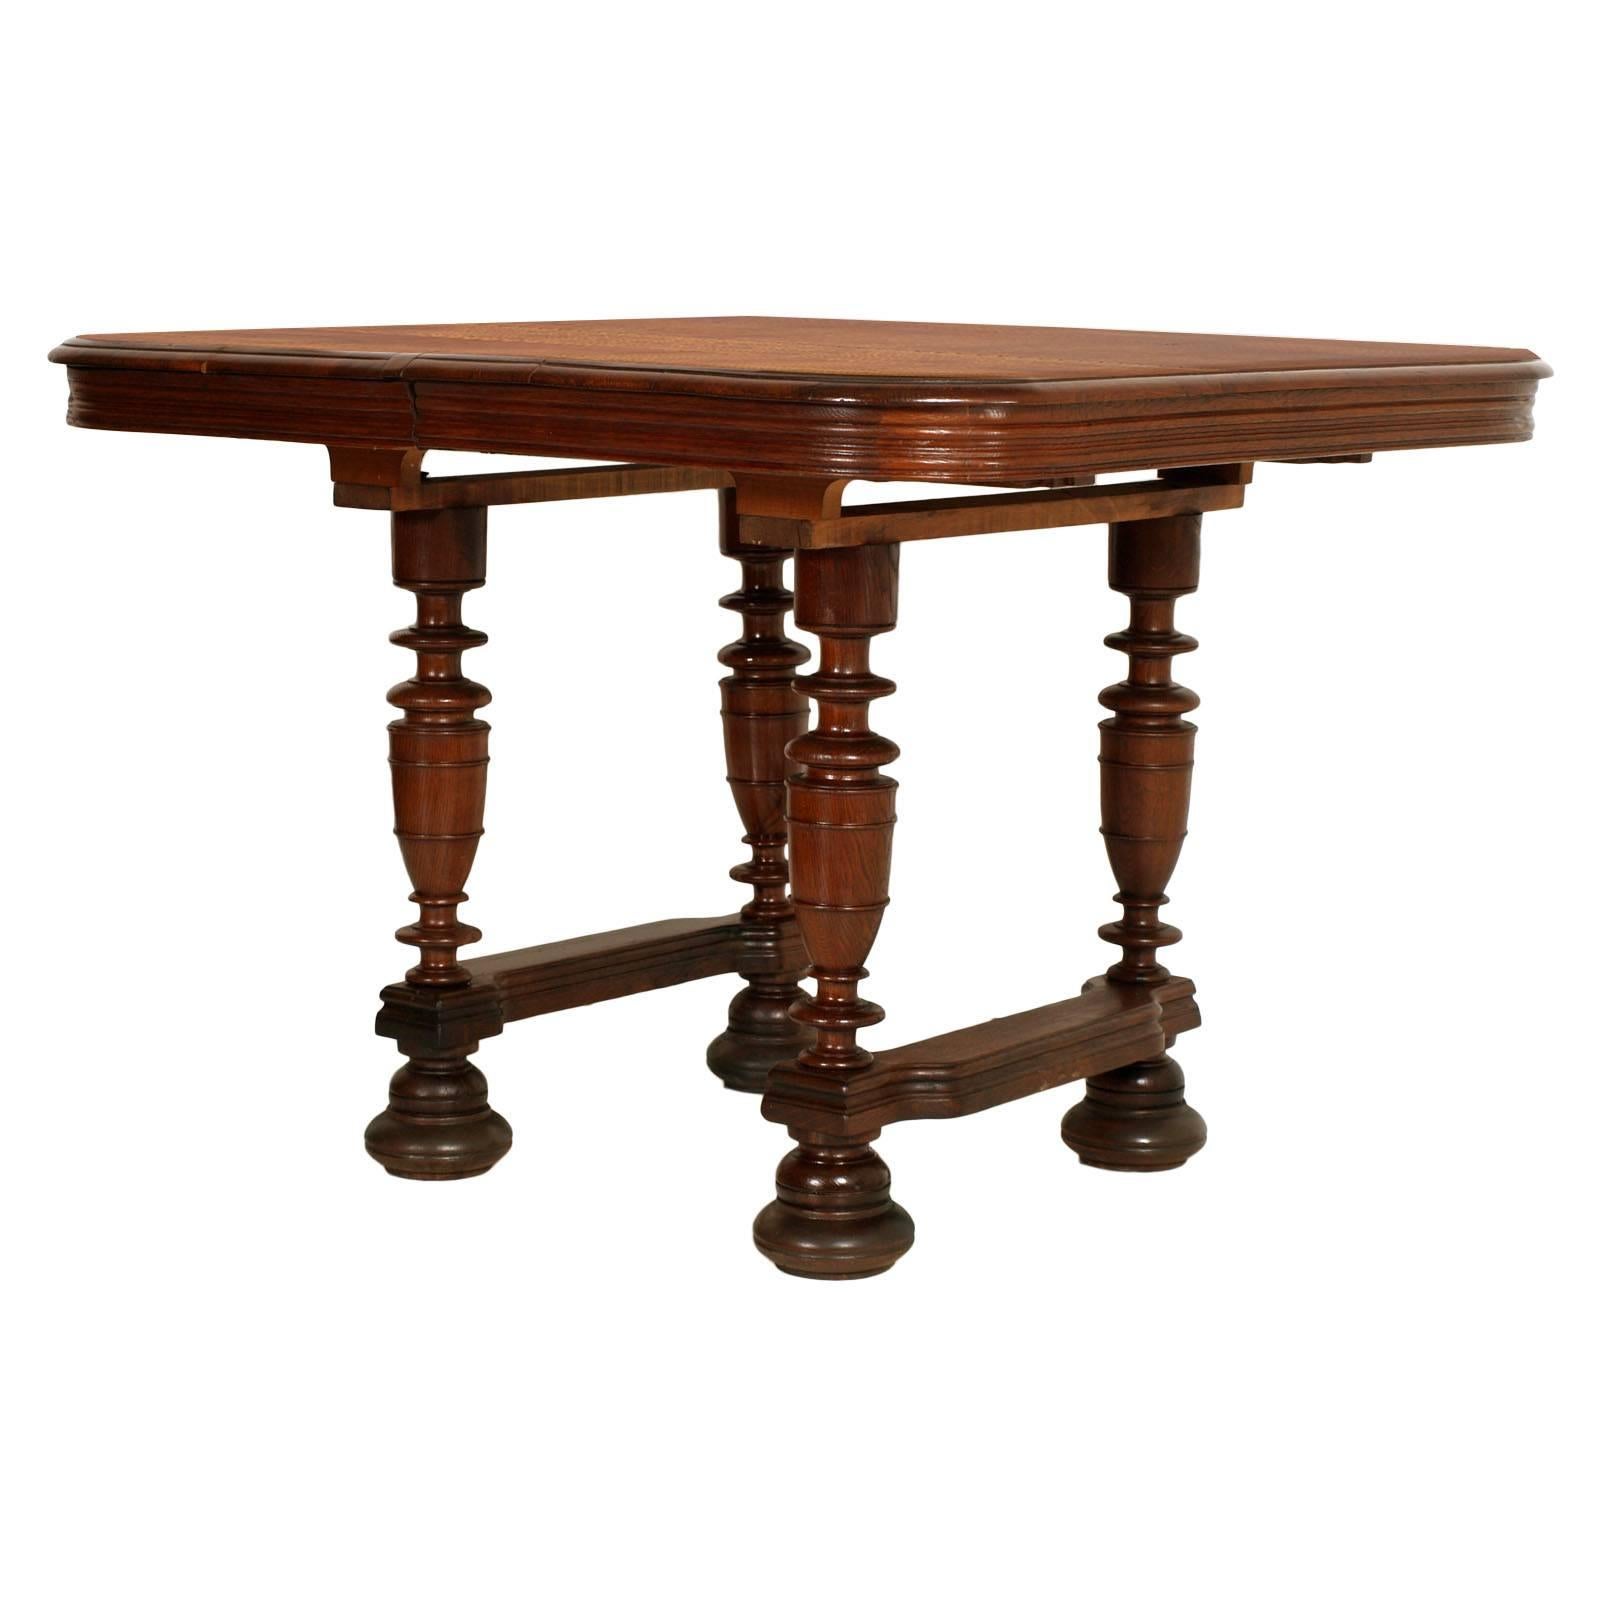 19th Century France Provencal Extendable Table Solid Oak, Restored, Wax-Polished